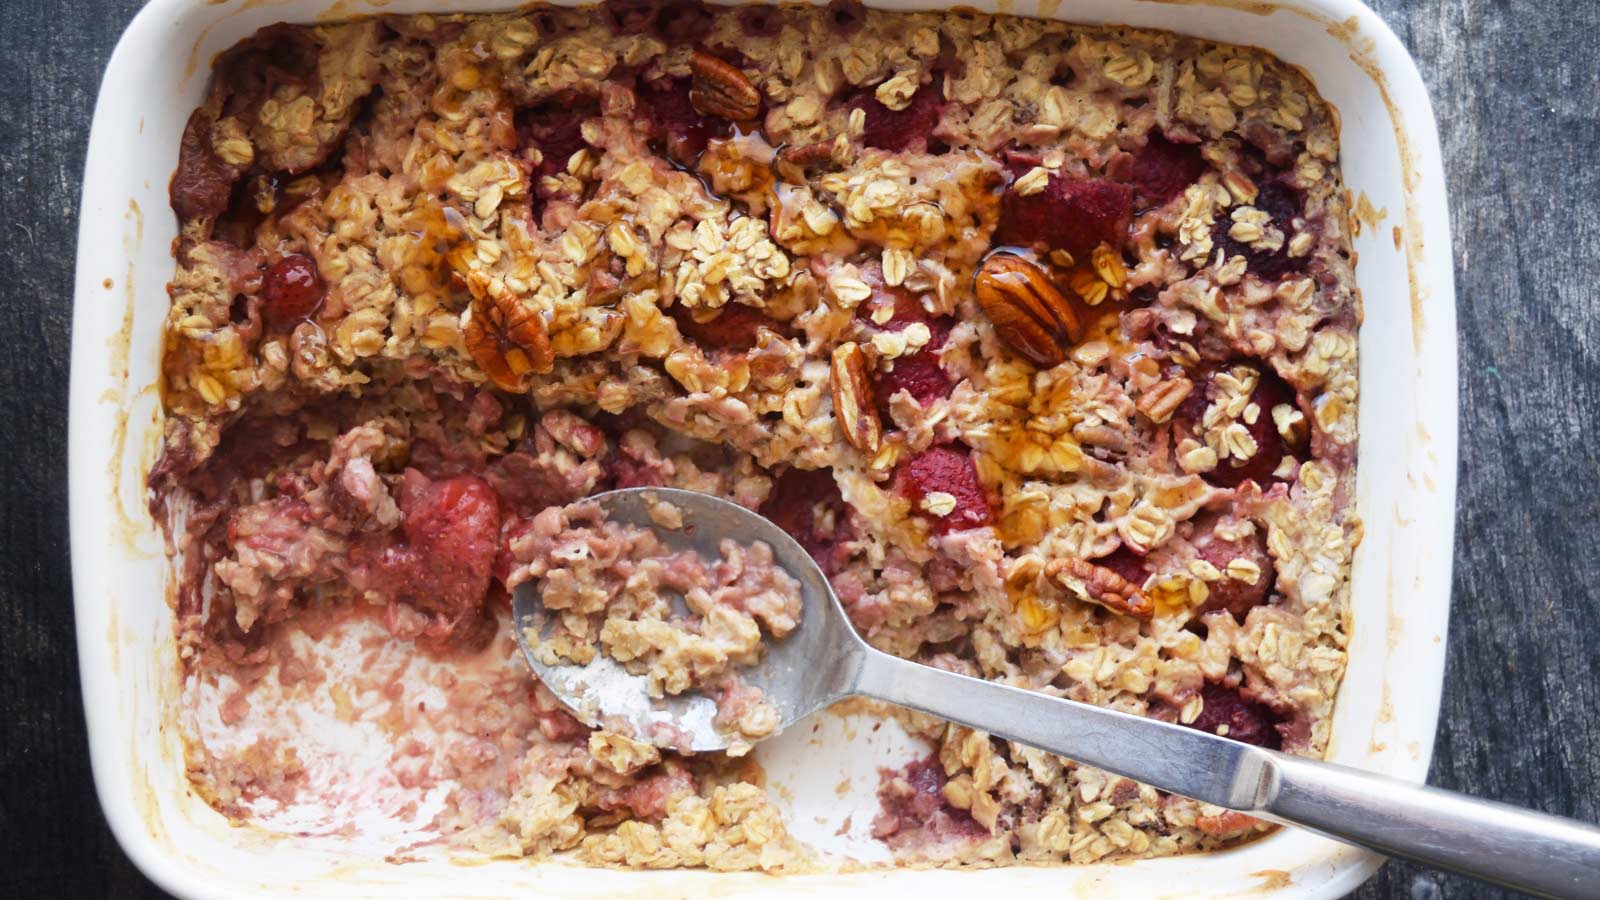 An overhead view of a partially eaten Baked Oatmeal With Strawberries in a casserole dish.